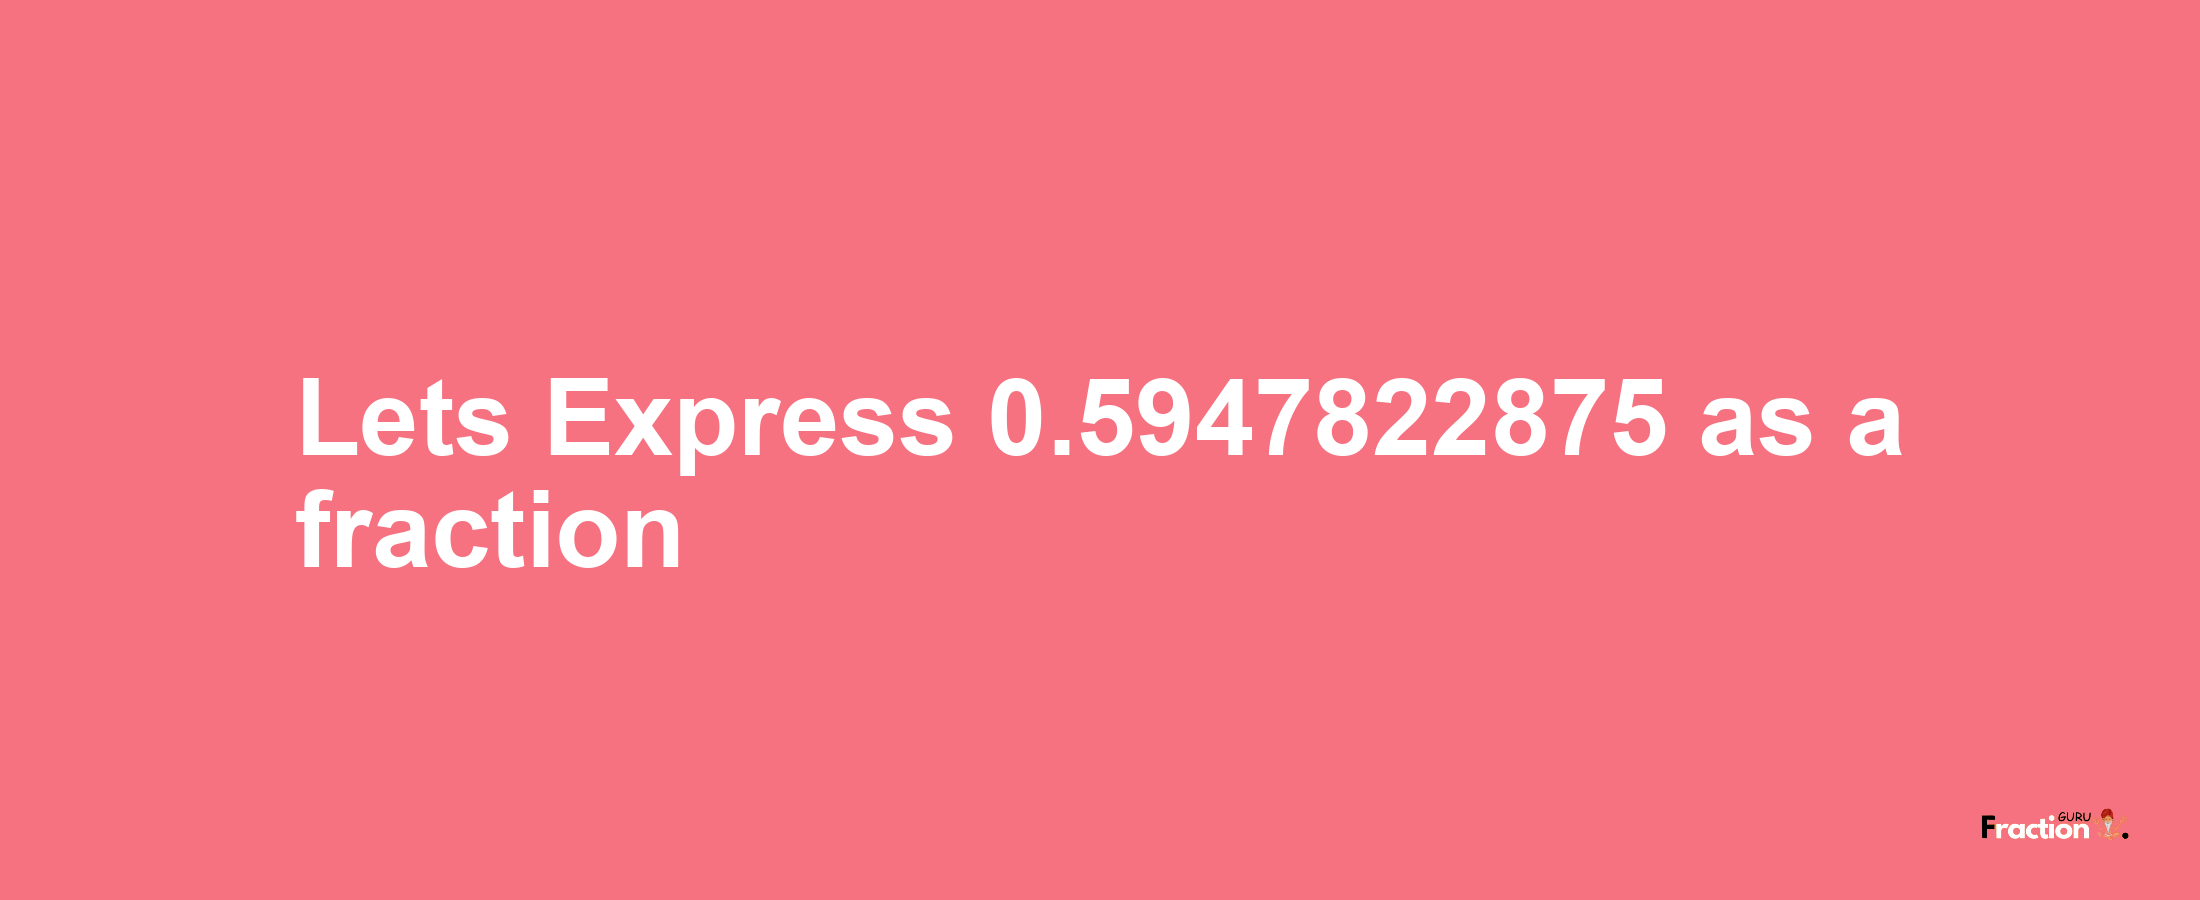 Lets Express 0.5947822875 as afraction